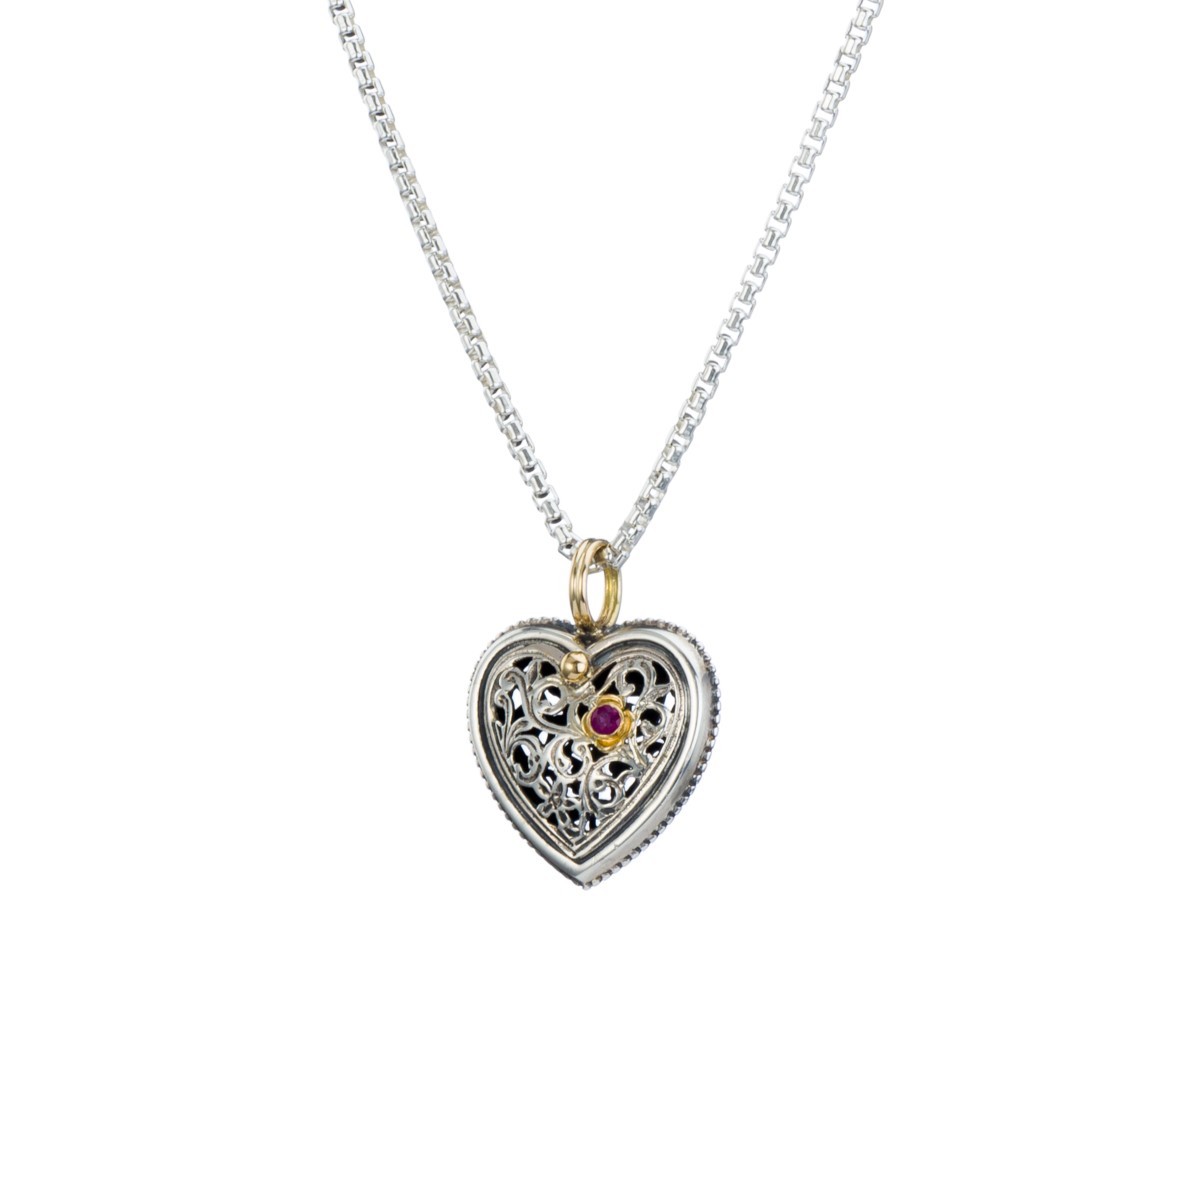 Garden Shadows Heart Pendant in 18K Gold and Sterling Silver with Ruby